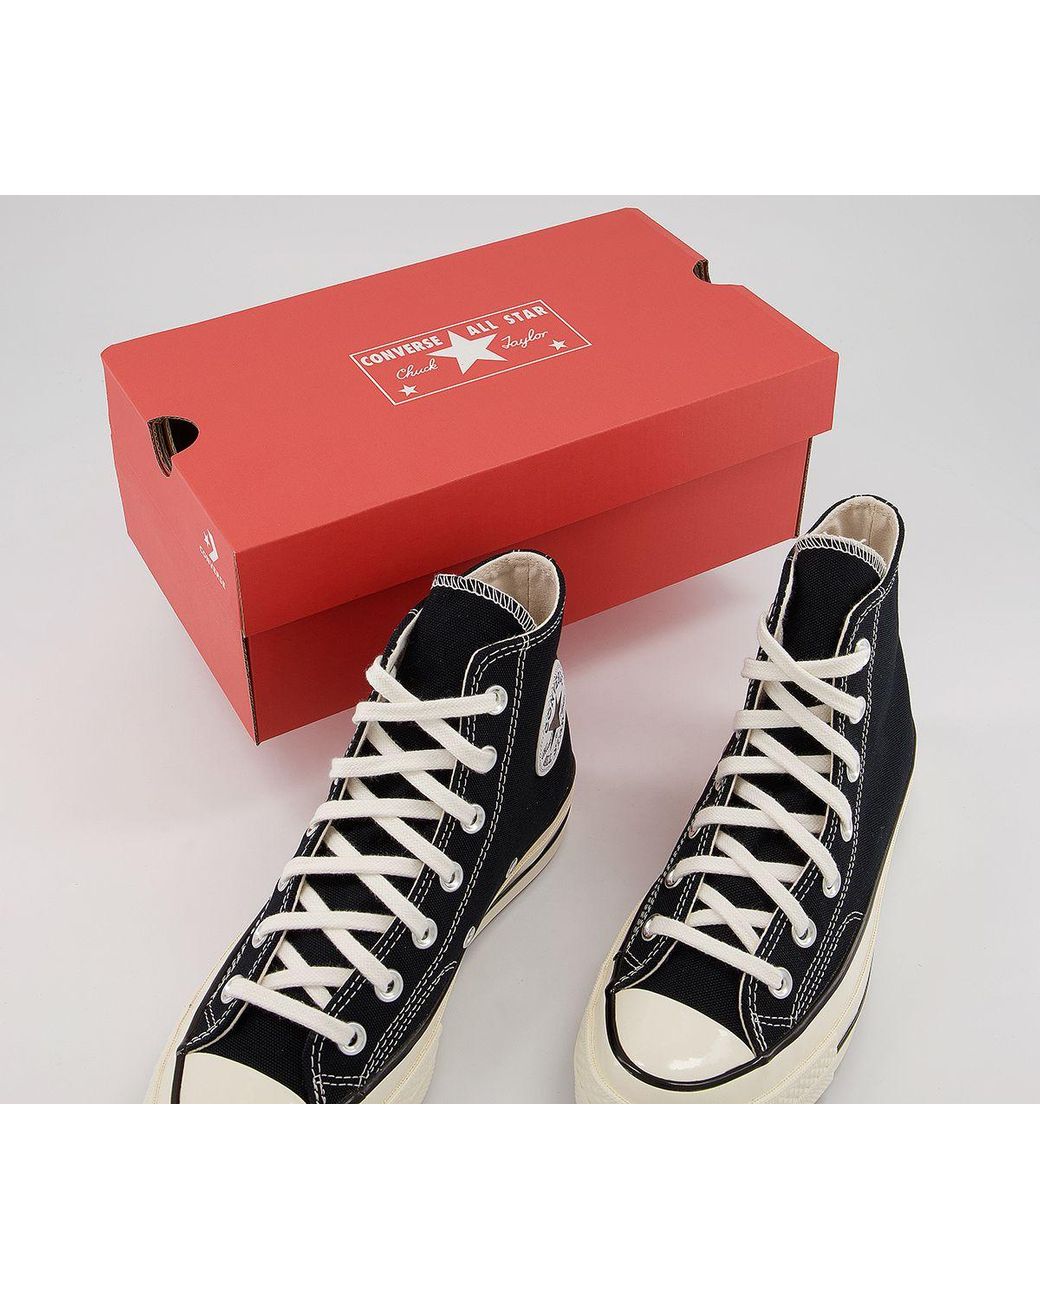 Converse Rubber All Star Hi 70's Trainers in Black for Men - Lyst